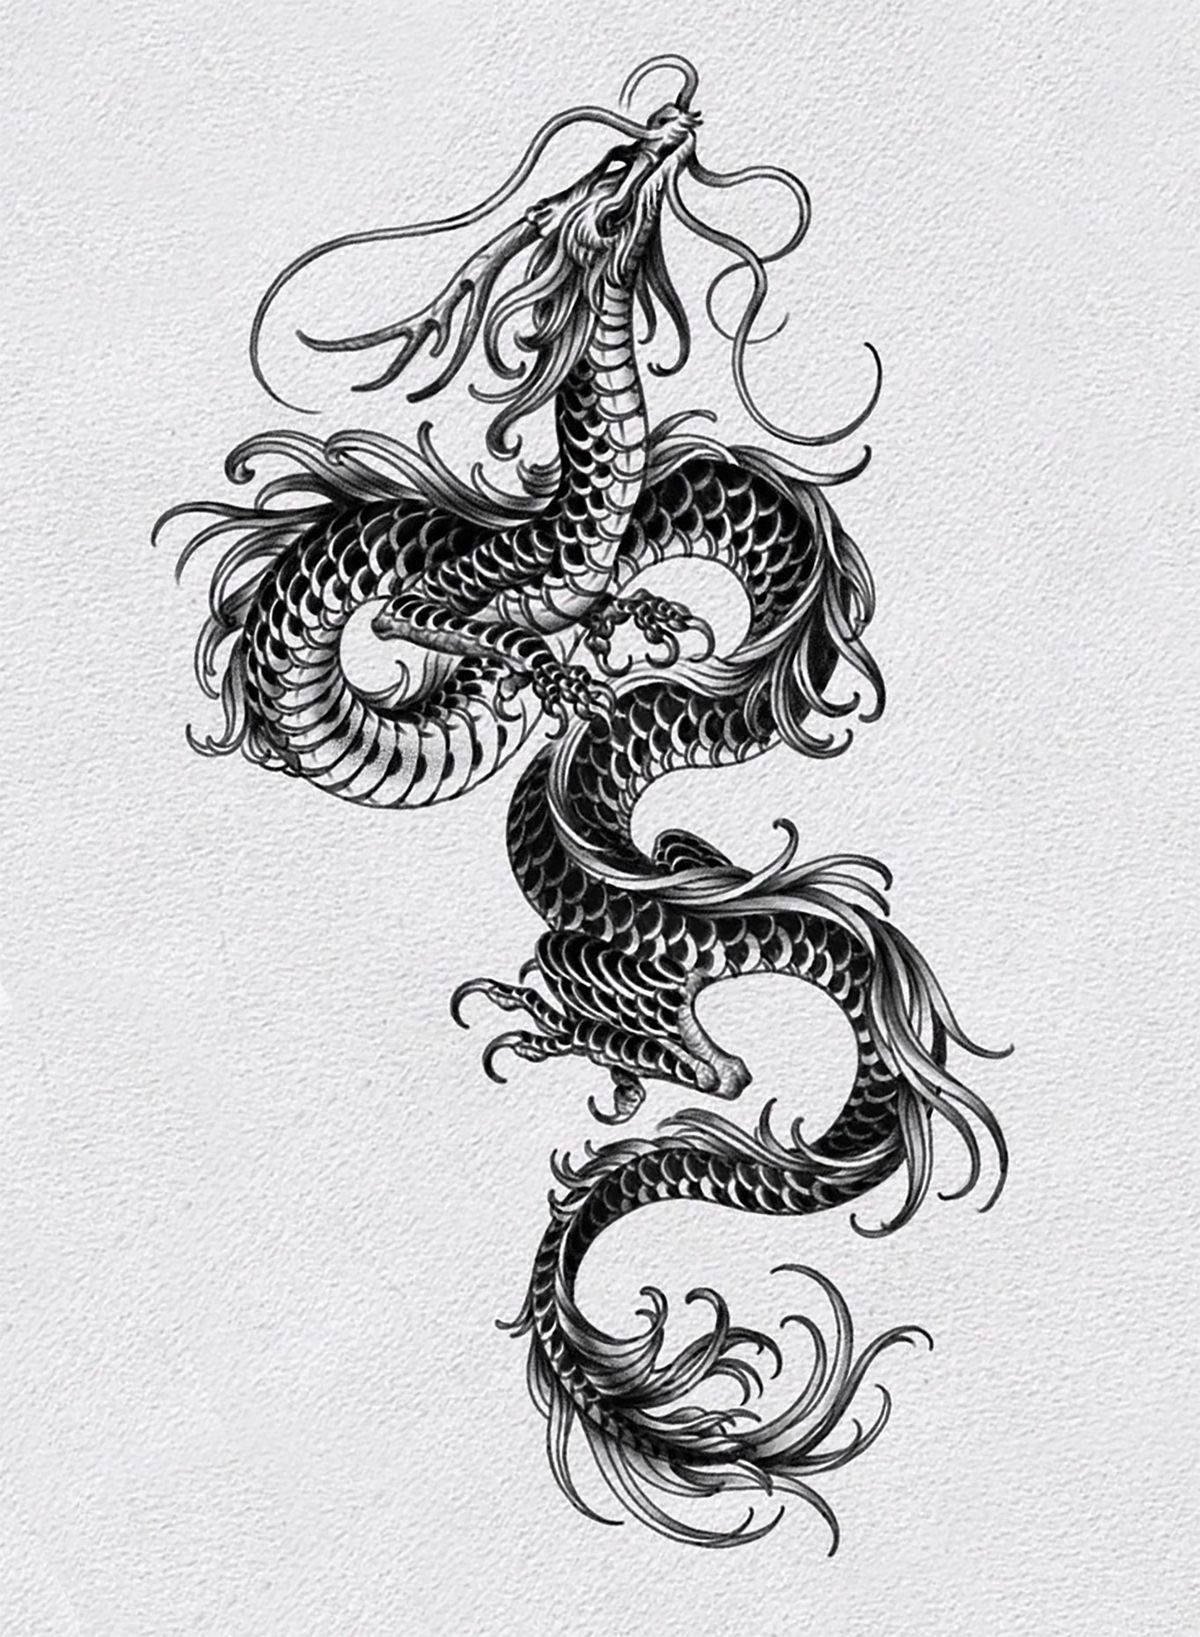 Dragon Tattoo Meaning - Tattoos With Meaning